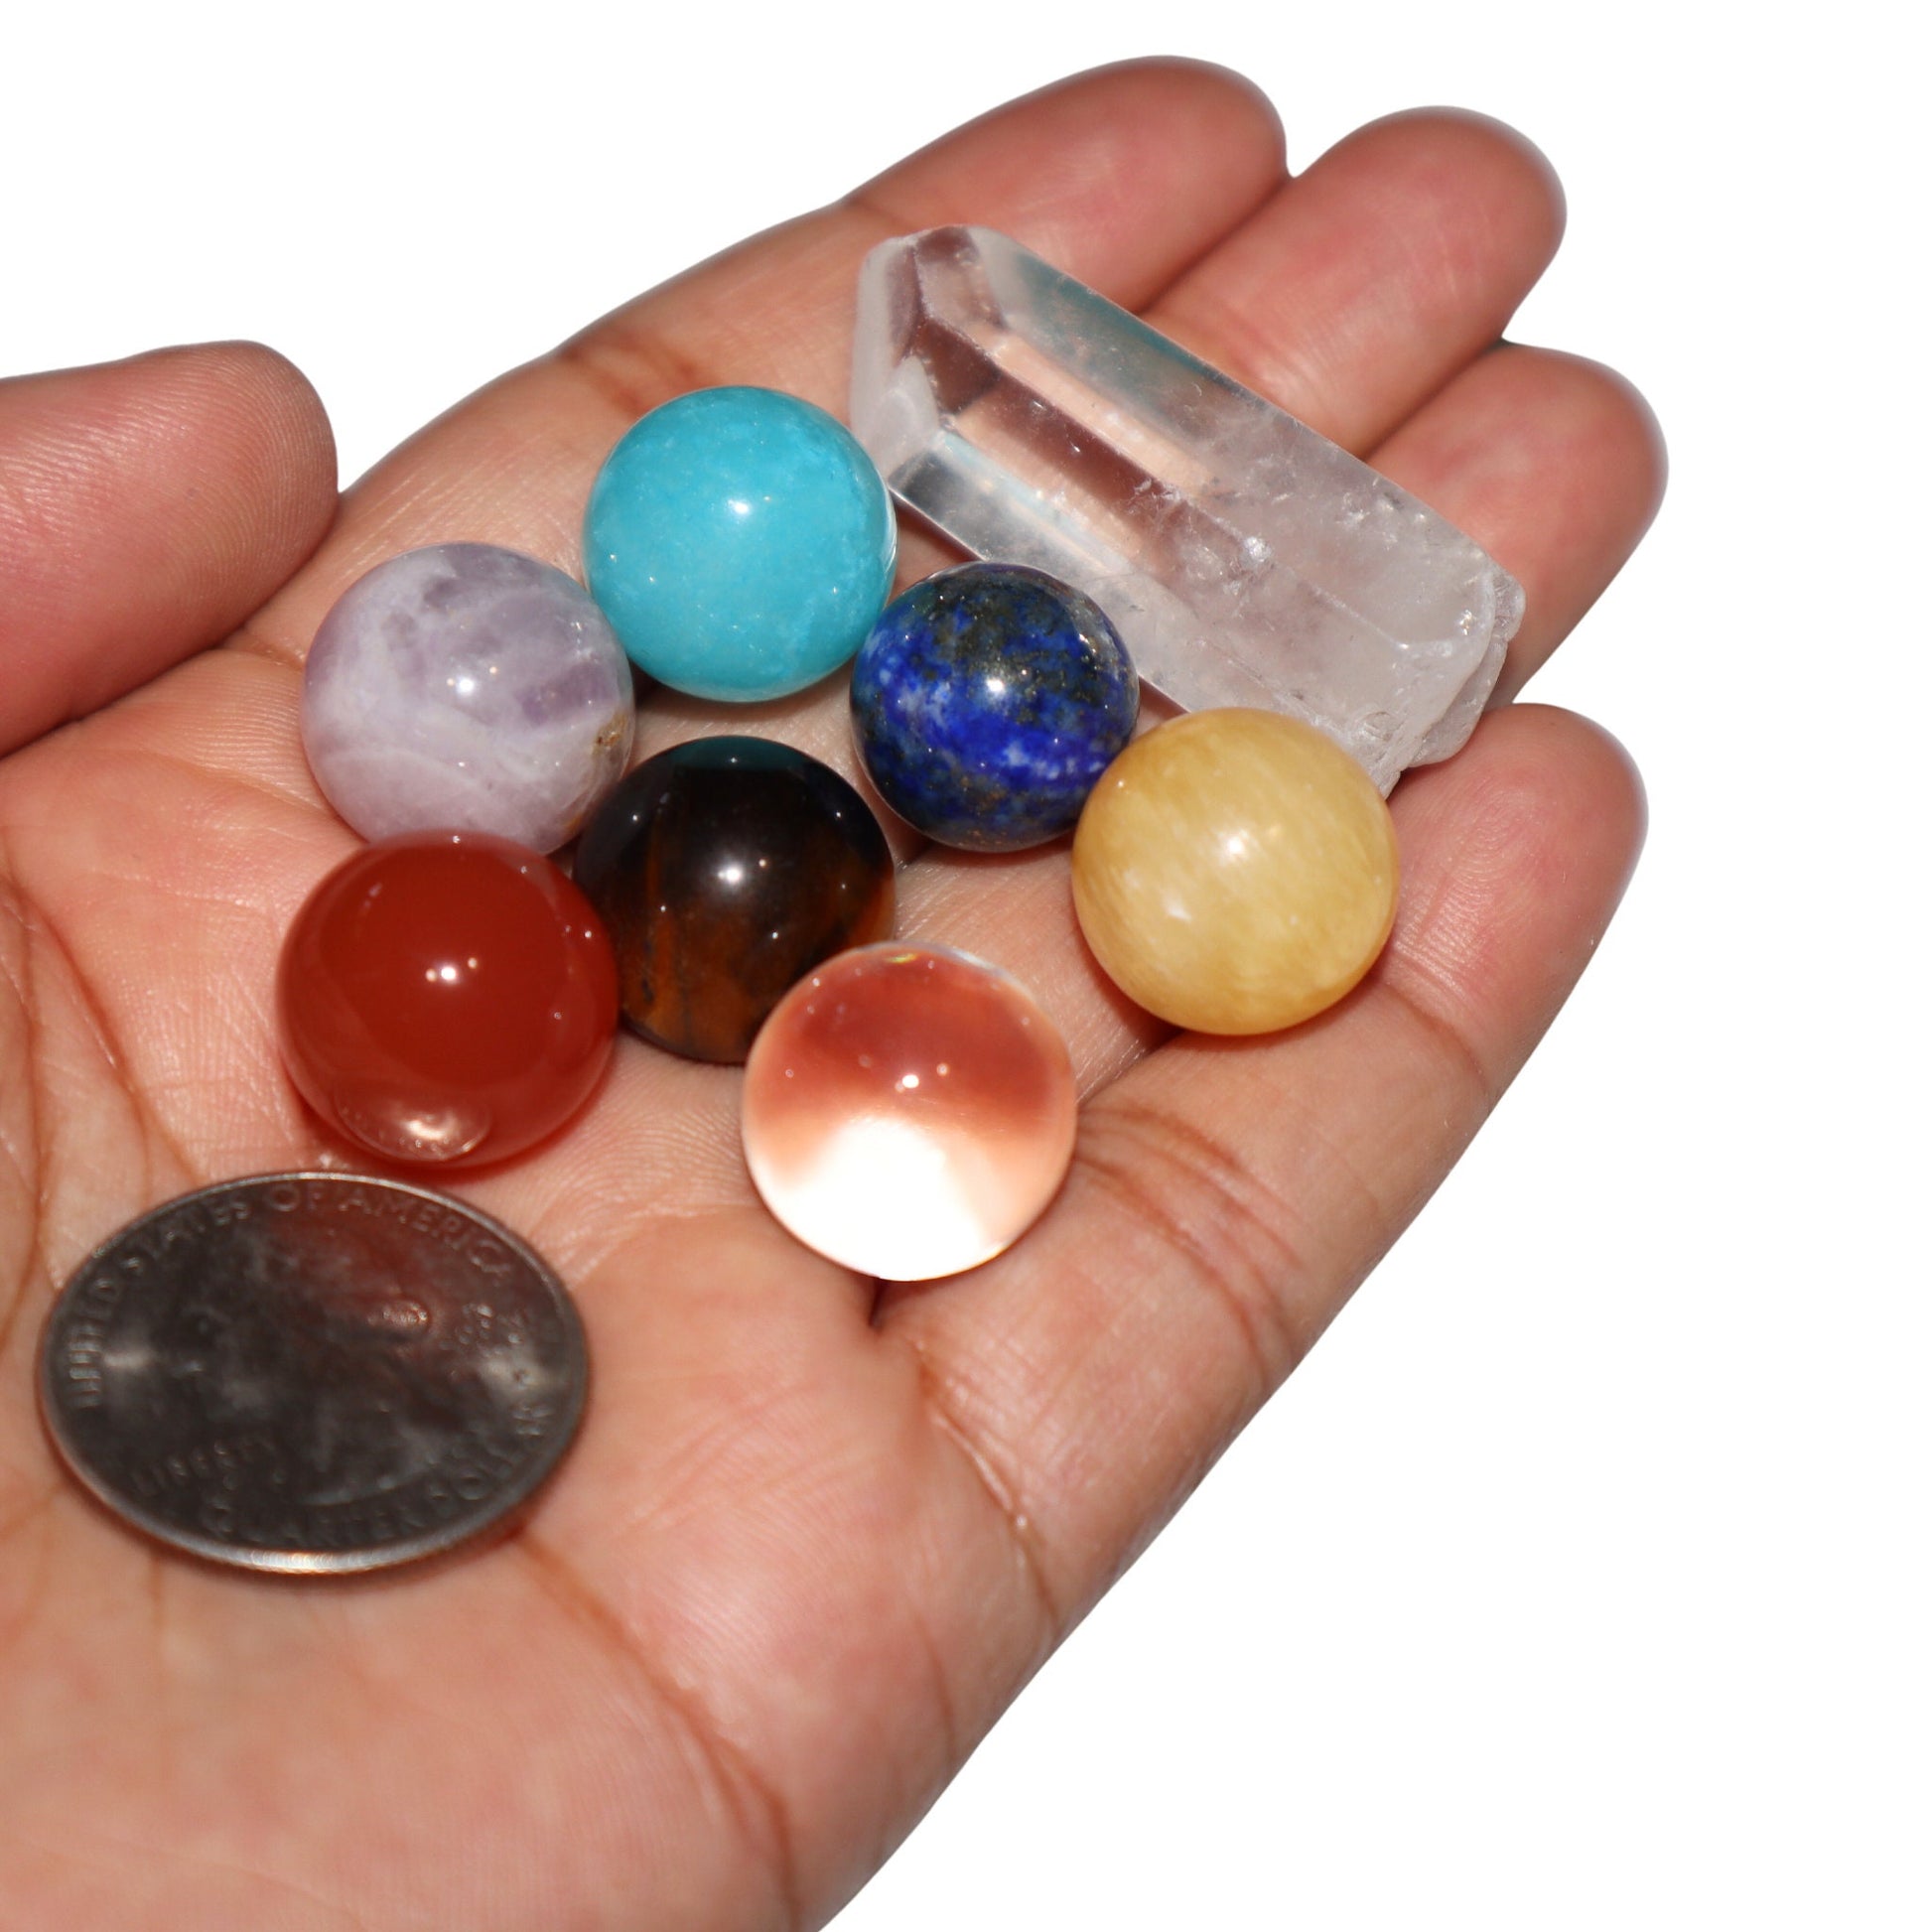 BEGINNER CRYSTAL SET, Chakra Crystal Set, Crystal Collection, 8 Pieces Chakra Set Includes 7 Mini Marble Spheres and 1 Clear Quartz Point